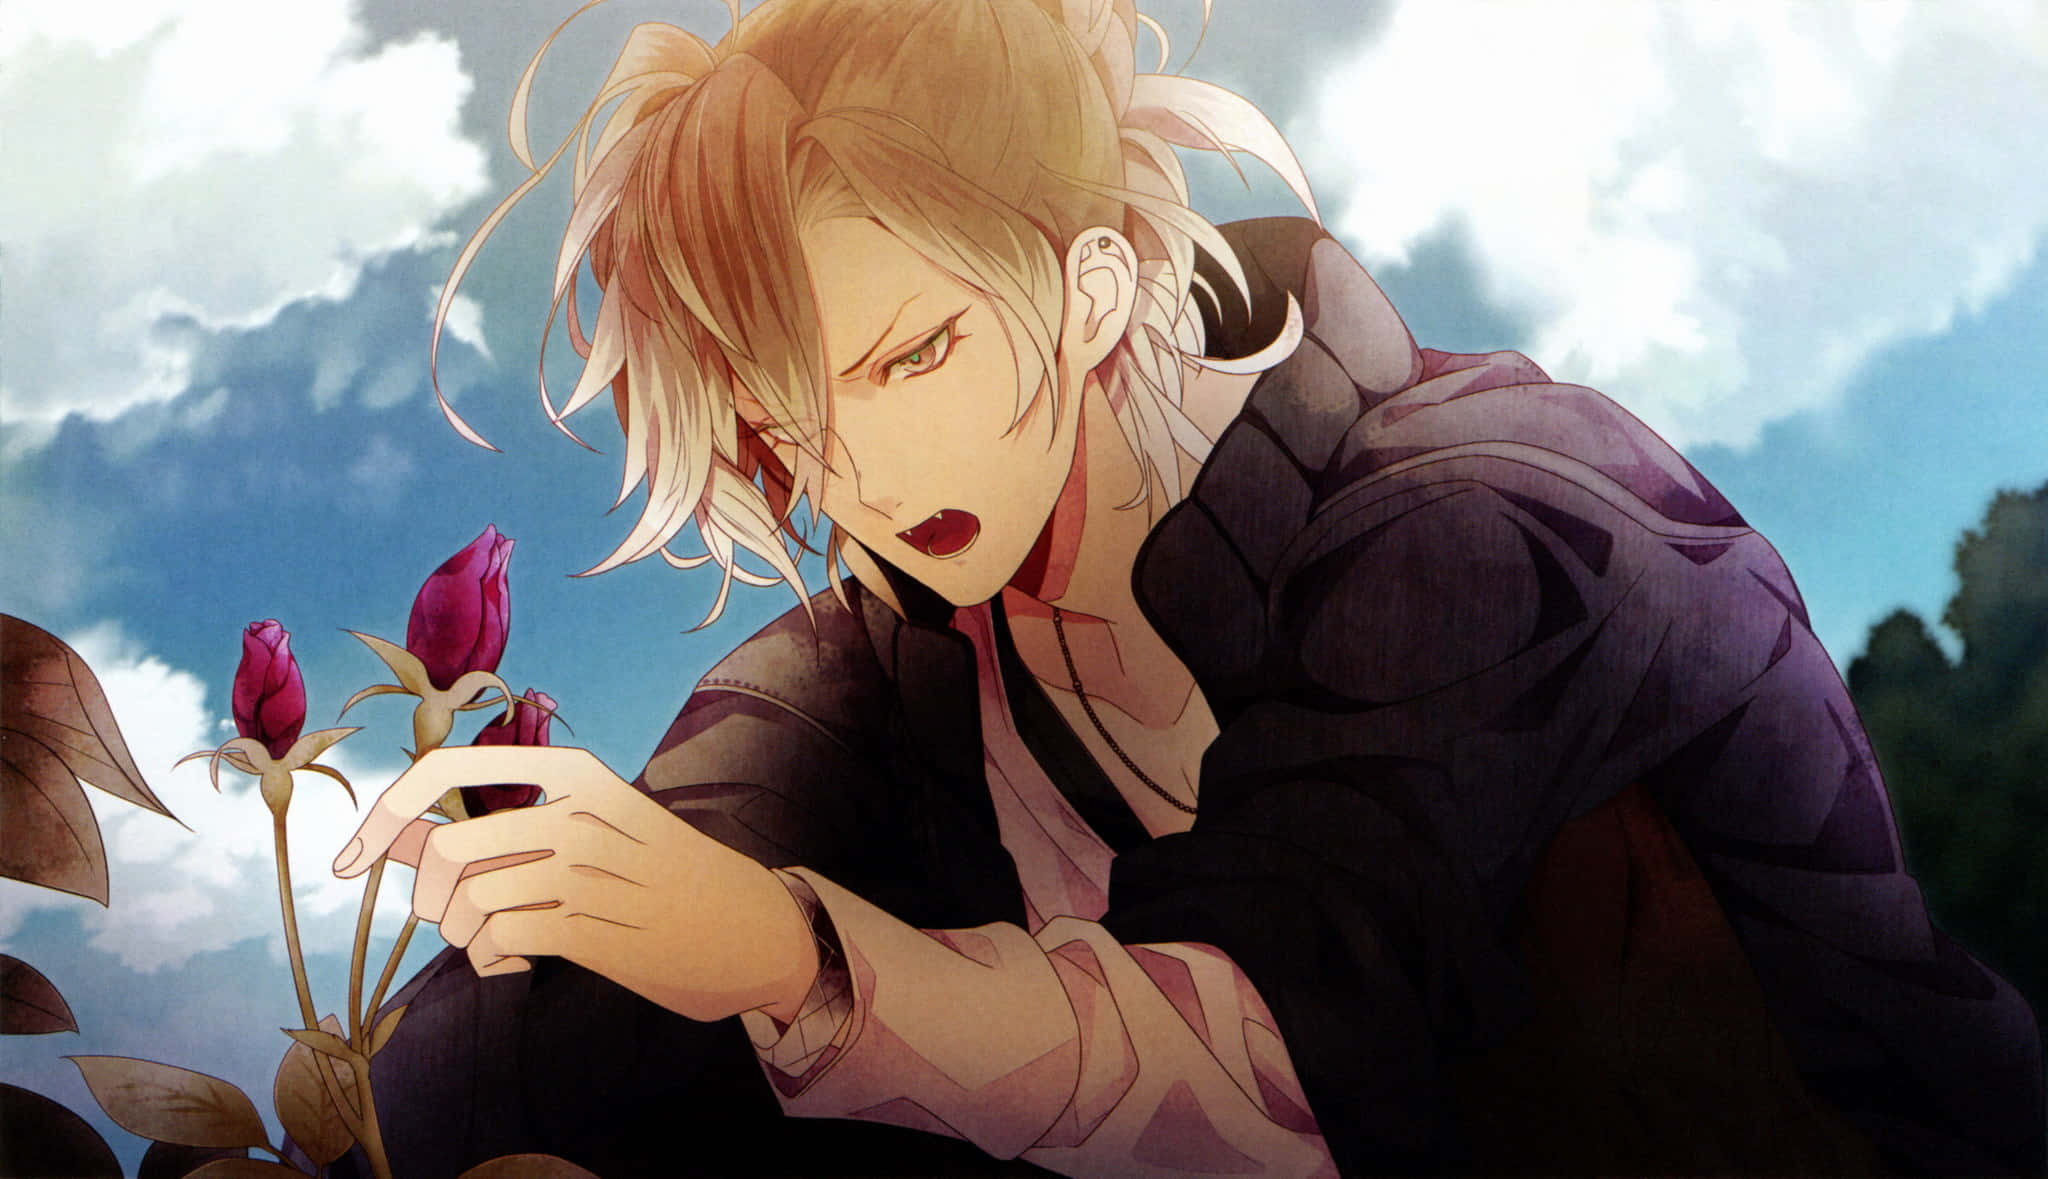 "Darkness Rises with Diabolik Lovers"